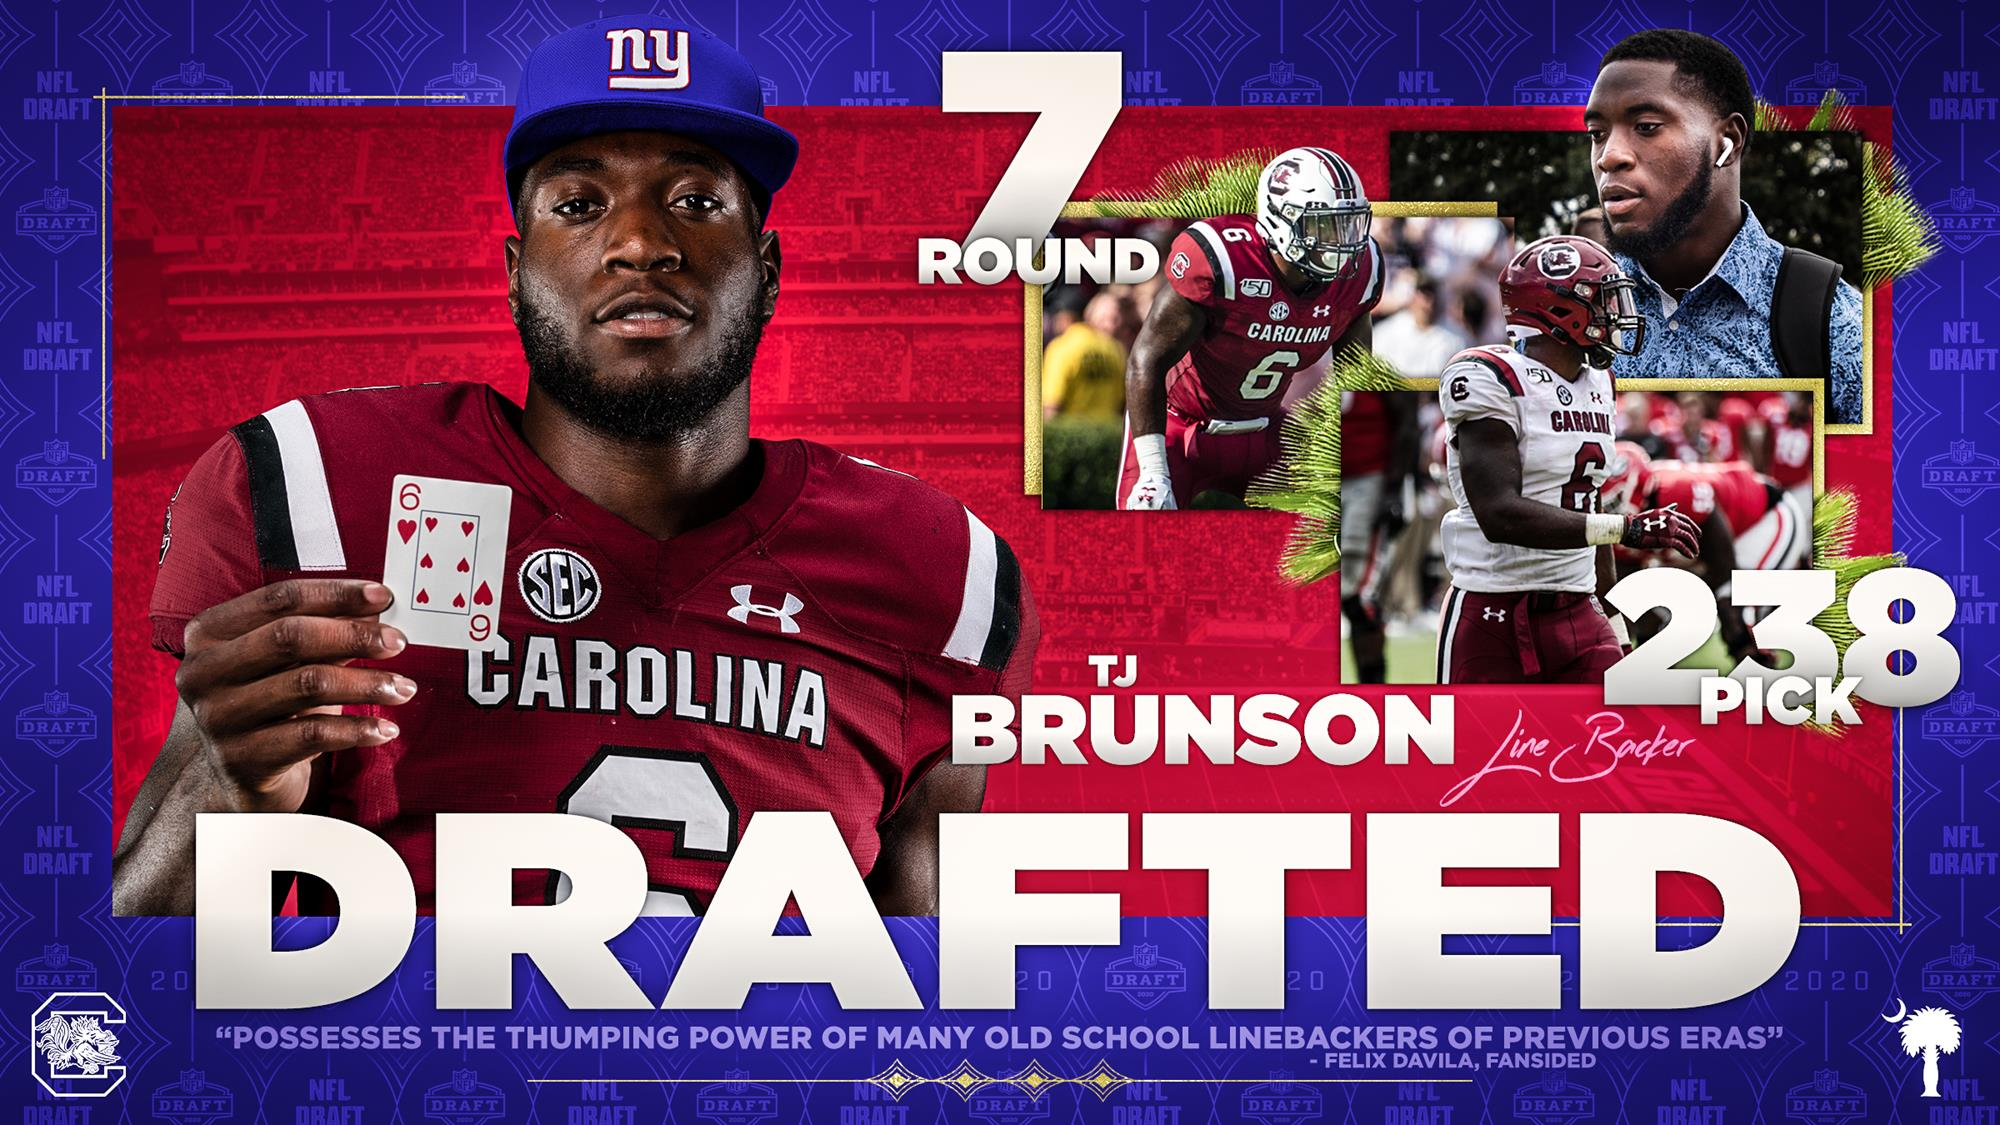 Brunson Selected by the New York Giants in the Seventh Round of NFL Draft